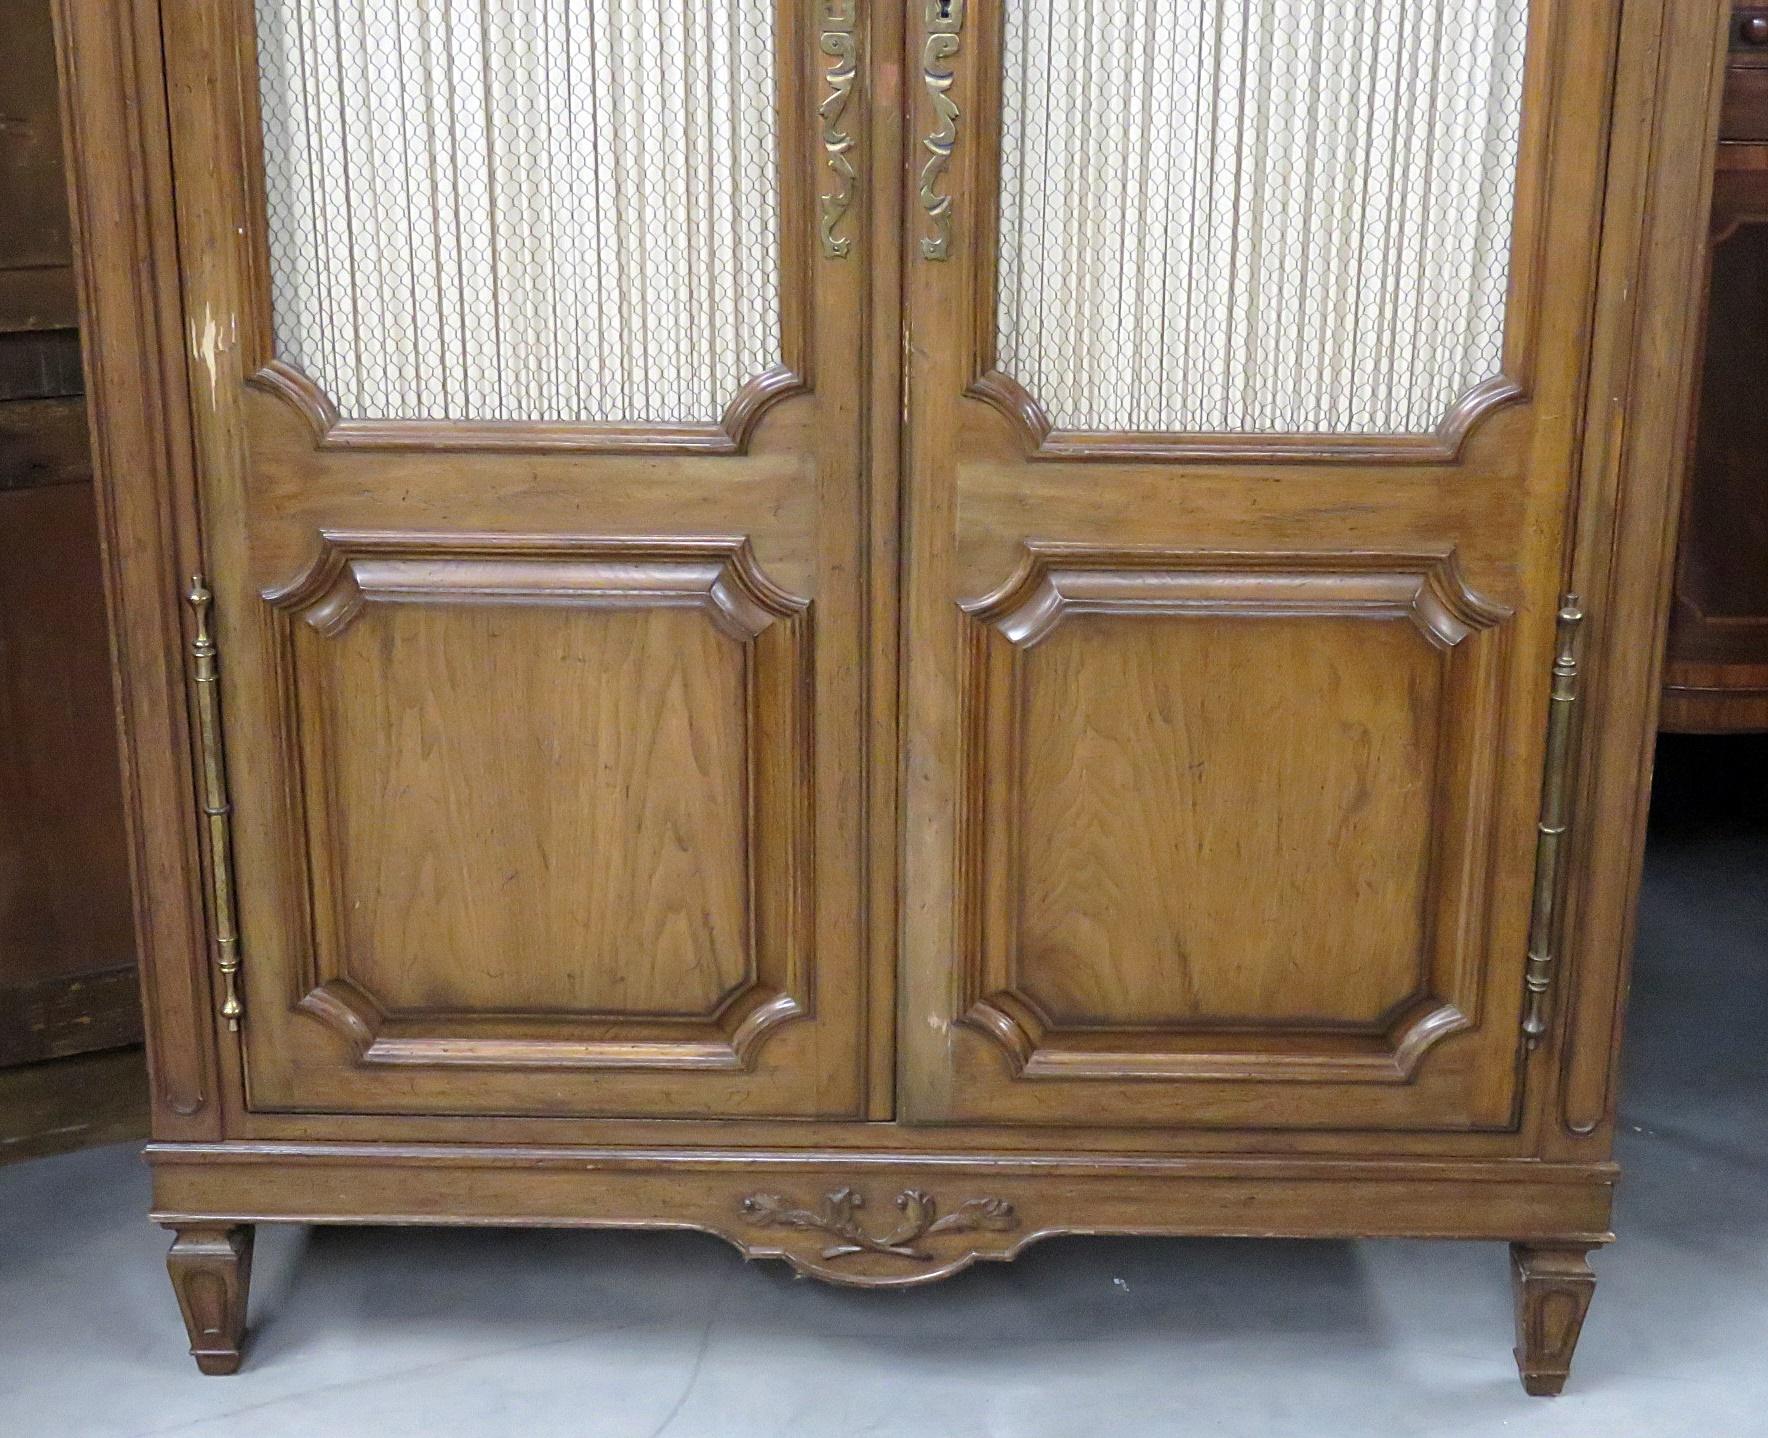 Auffray Country French armoire with 1 shelf, 8 storage cubes, and 6 drawers.